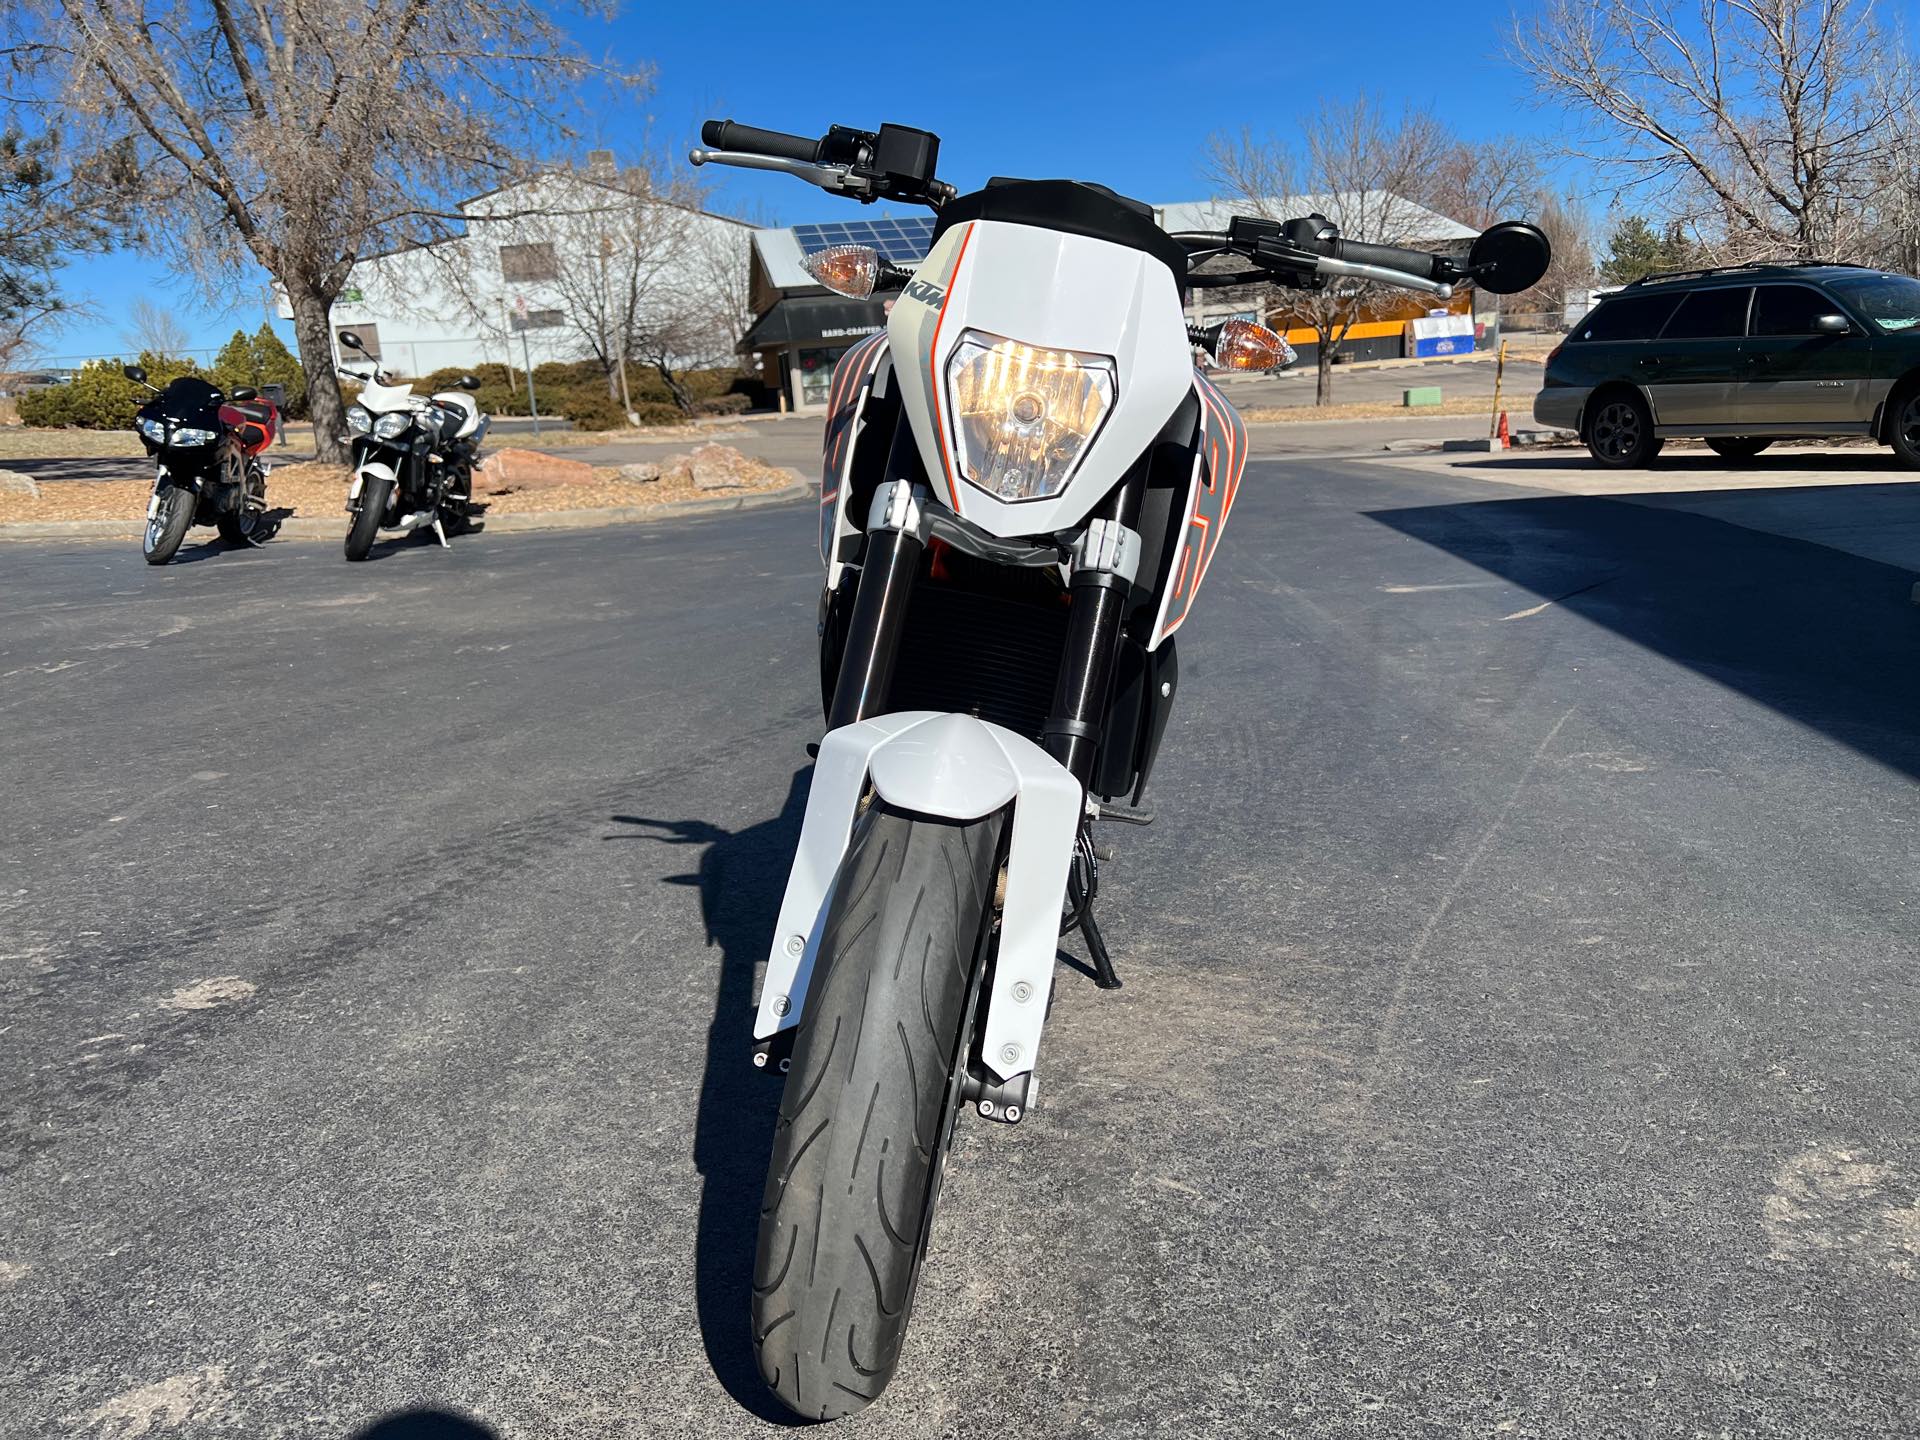 2014 KTM Duke 690 ABS at Aces Motorcycles - Fort Collins